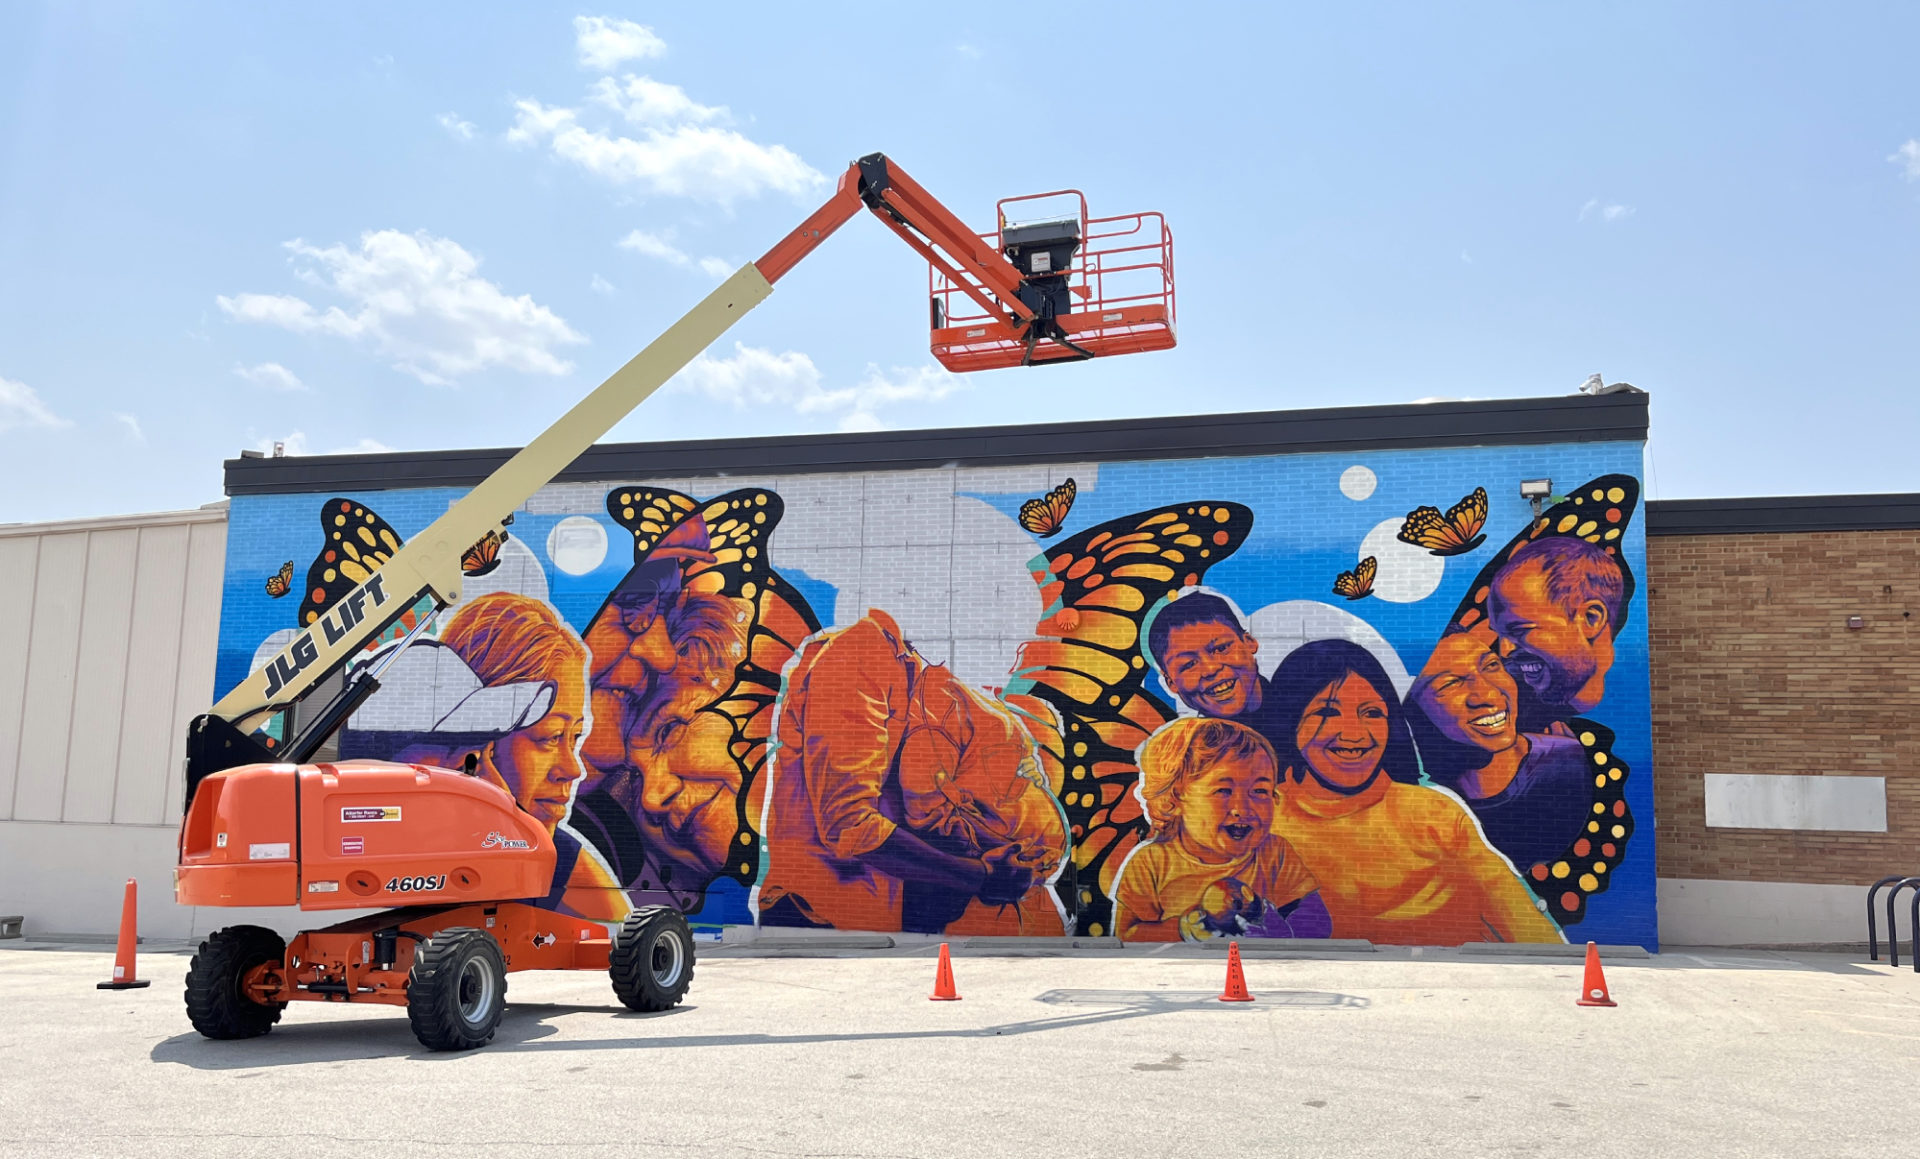 Jose Vazquez walks us through the creation of that incredible CUPHD mural